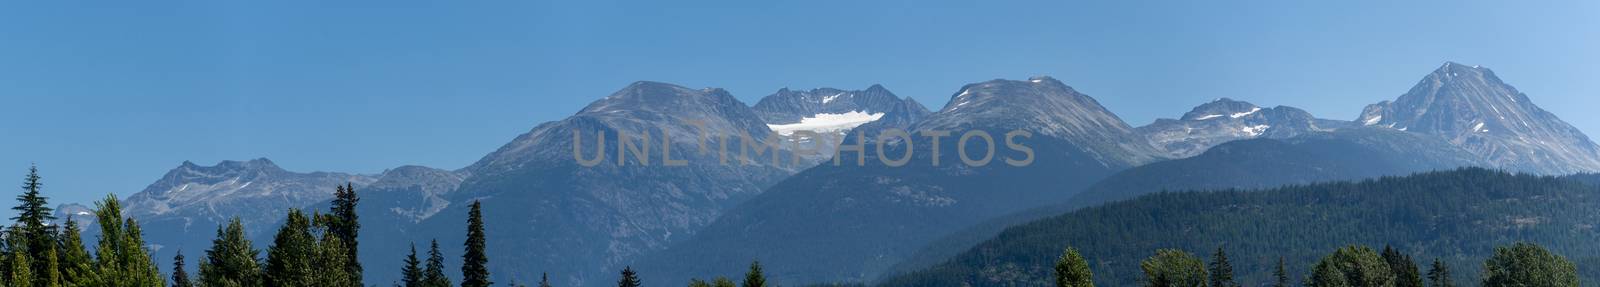 Whistler Mountain Panorama in British Columbia, Canada in the summer sun and blue sky looking at mountain range